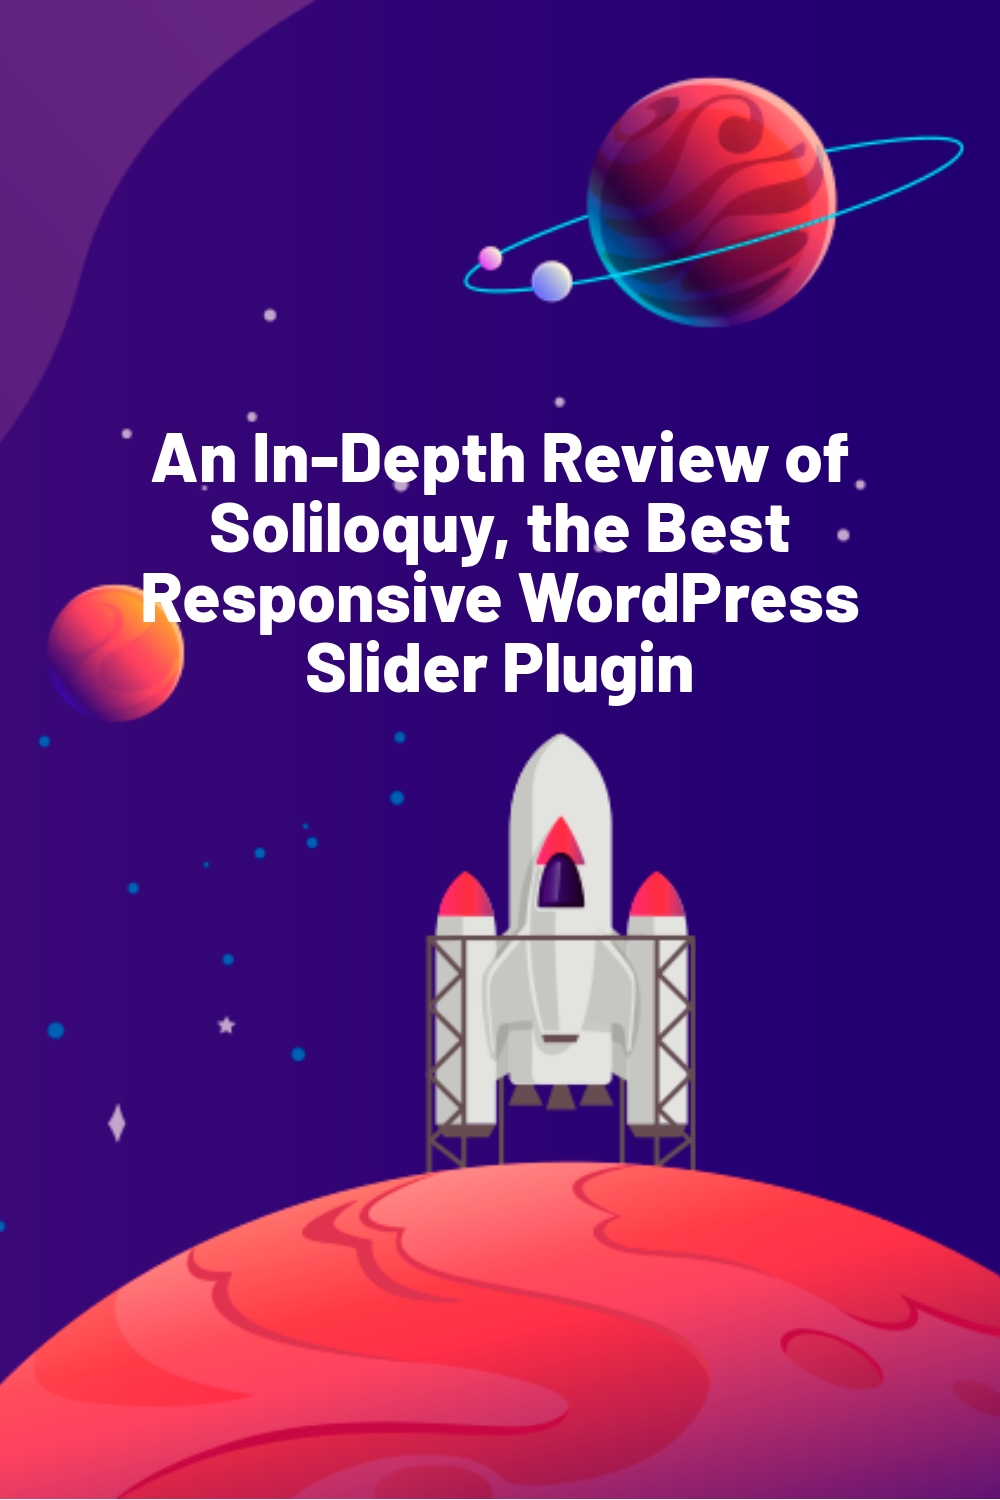 An In-Depth Review of Soliloquy, the Best Responsive WordPress Slider Plugin